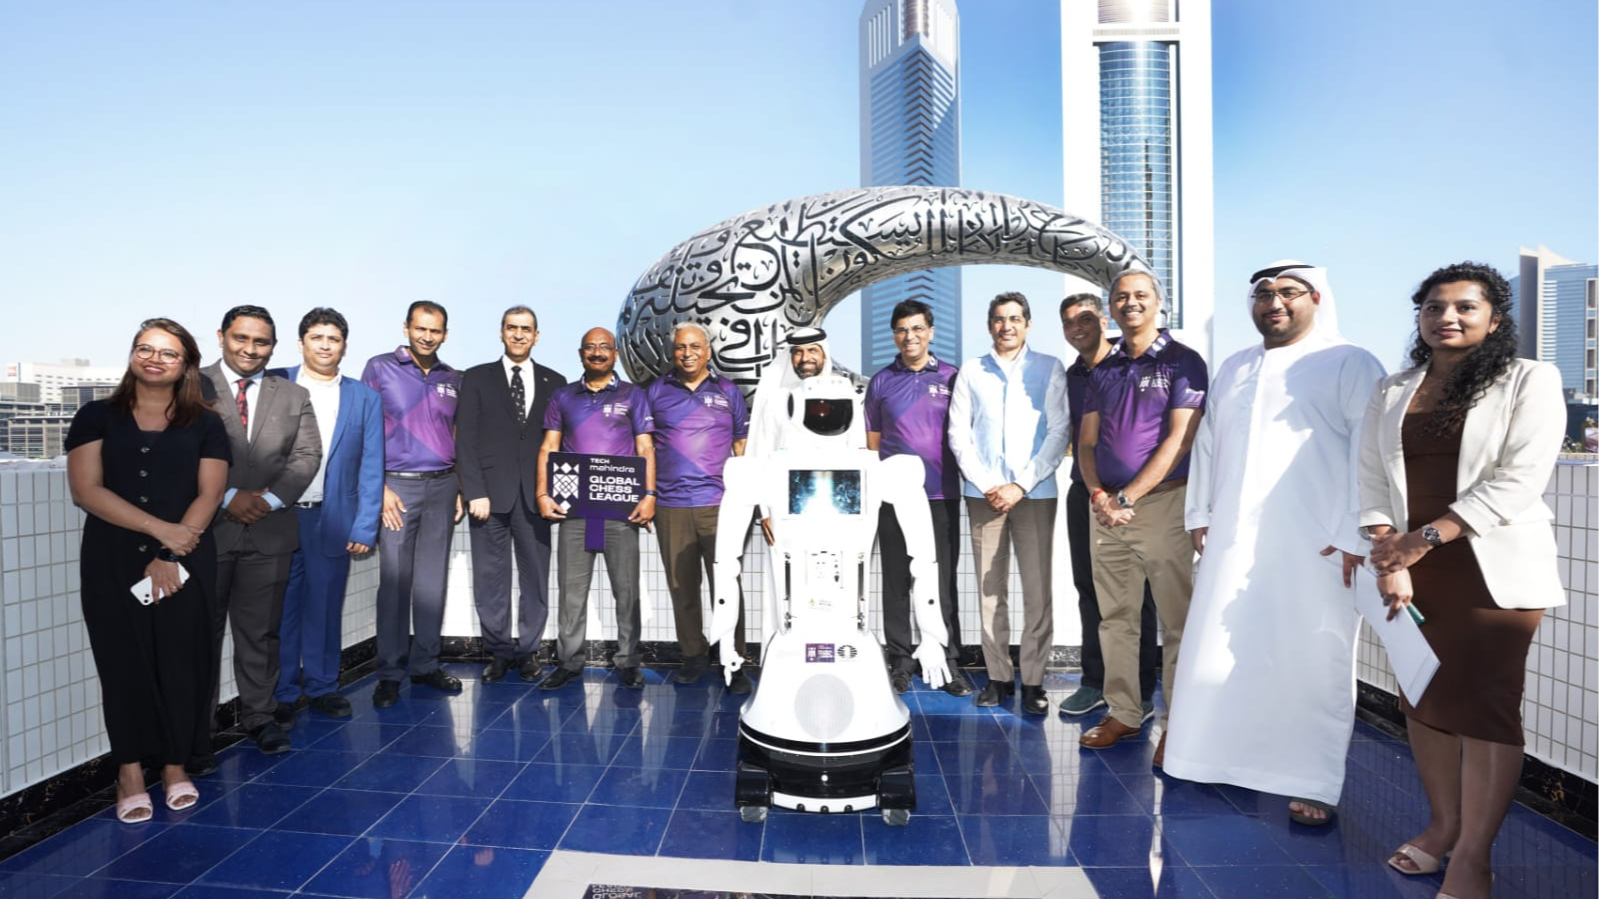 https://adgully.me/post/1981/dubai-to-host-the-inaugural-edition-of-global-chess-league